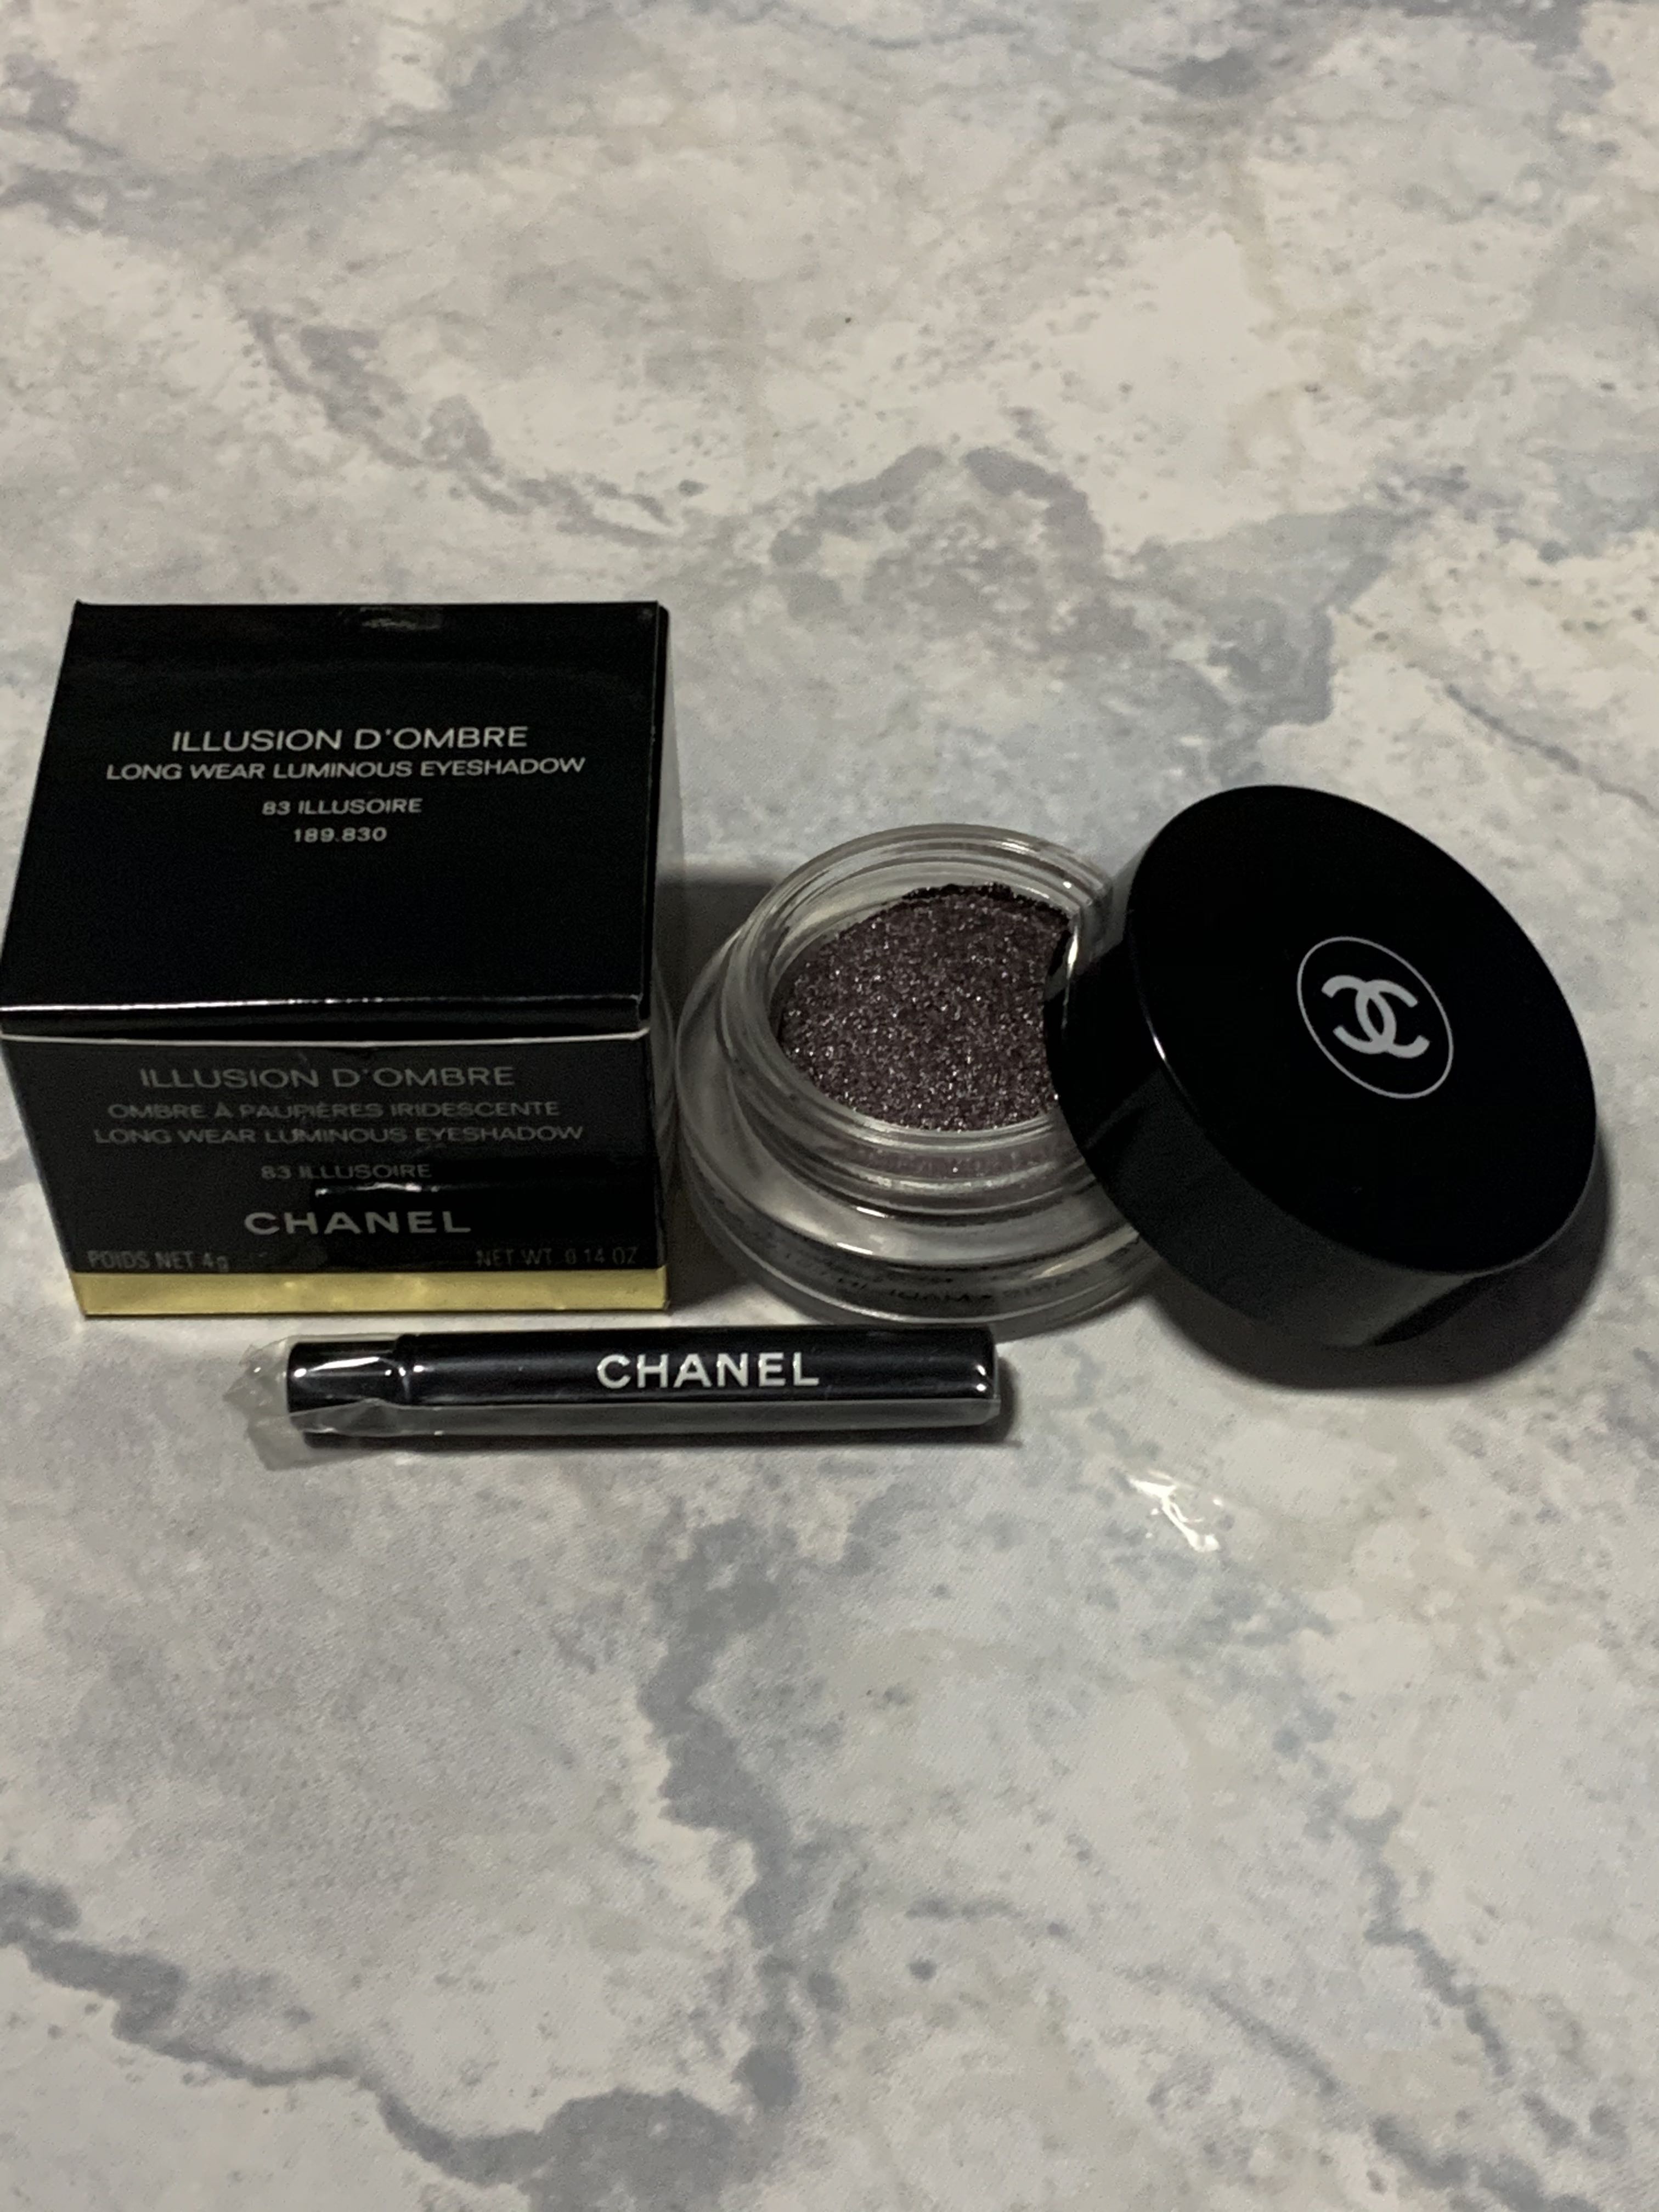 CHANEL ILLUSION D'OMBRE (83 ILLUSOIRE)Long wear luminous eyeshadow, Beauty  & Personal Care, Face, Makeup on Carousell